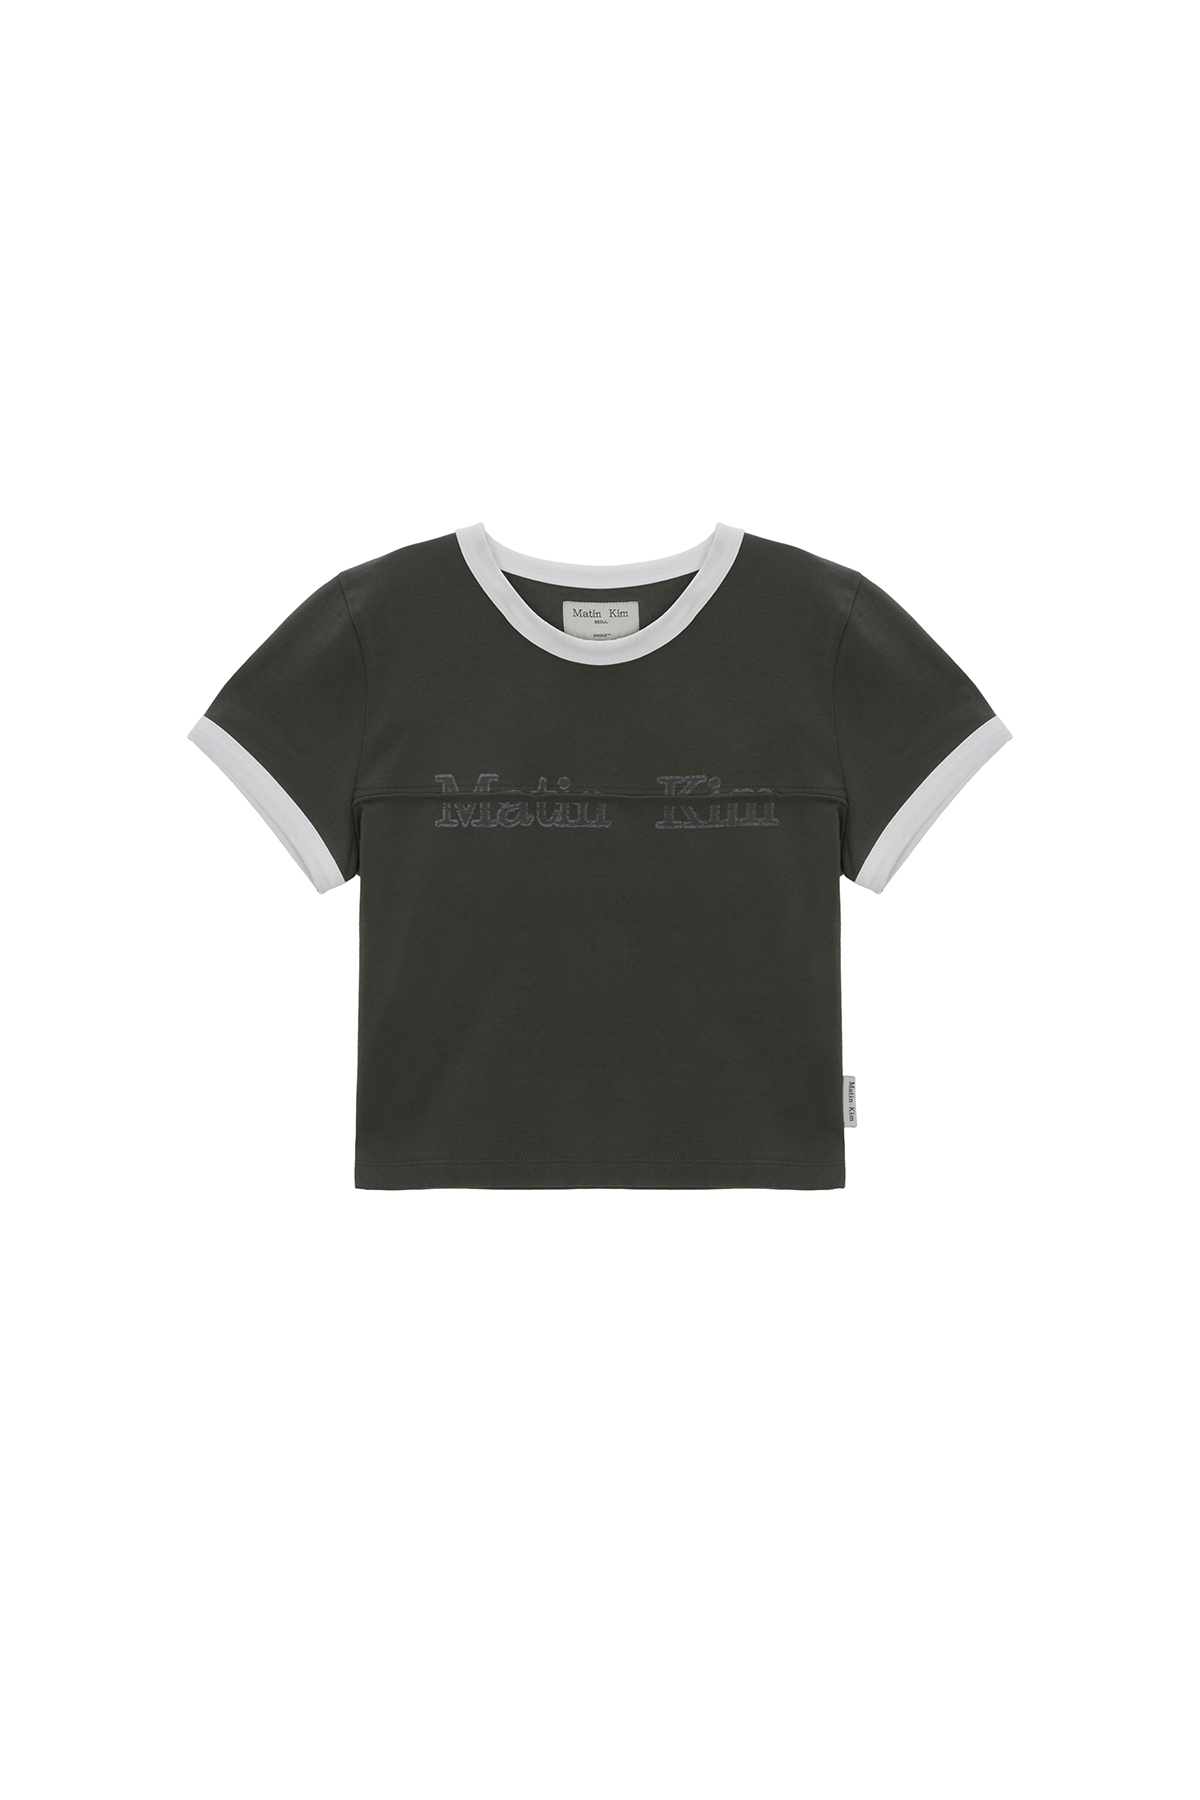 CUTTED LOGO RINGER CROP TOP IN CHARCOAL